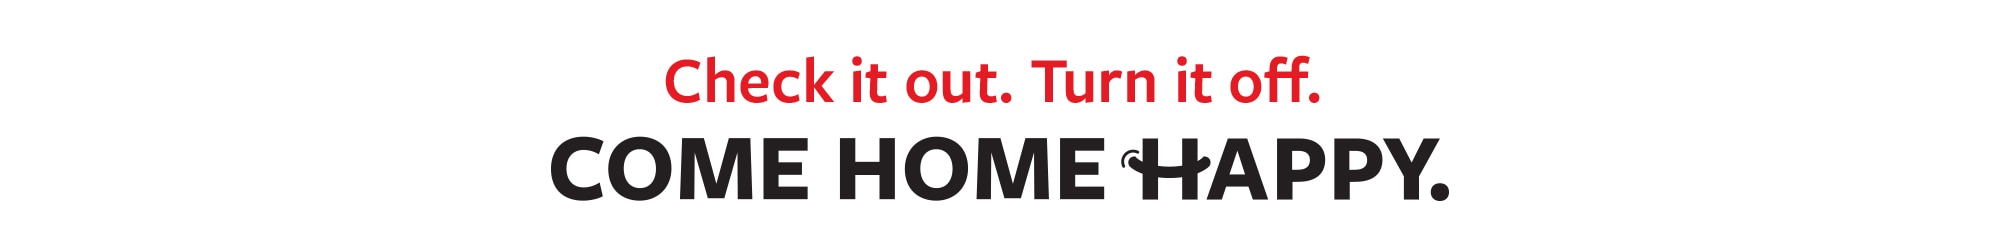 Check it out. Turn it off. Come Home Happy.